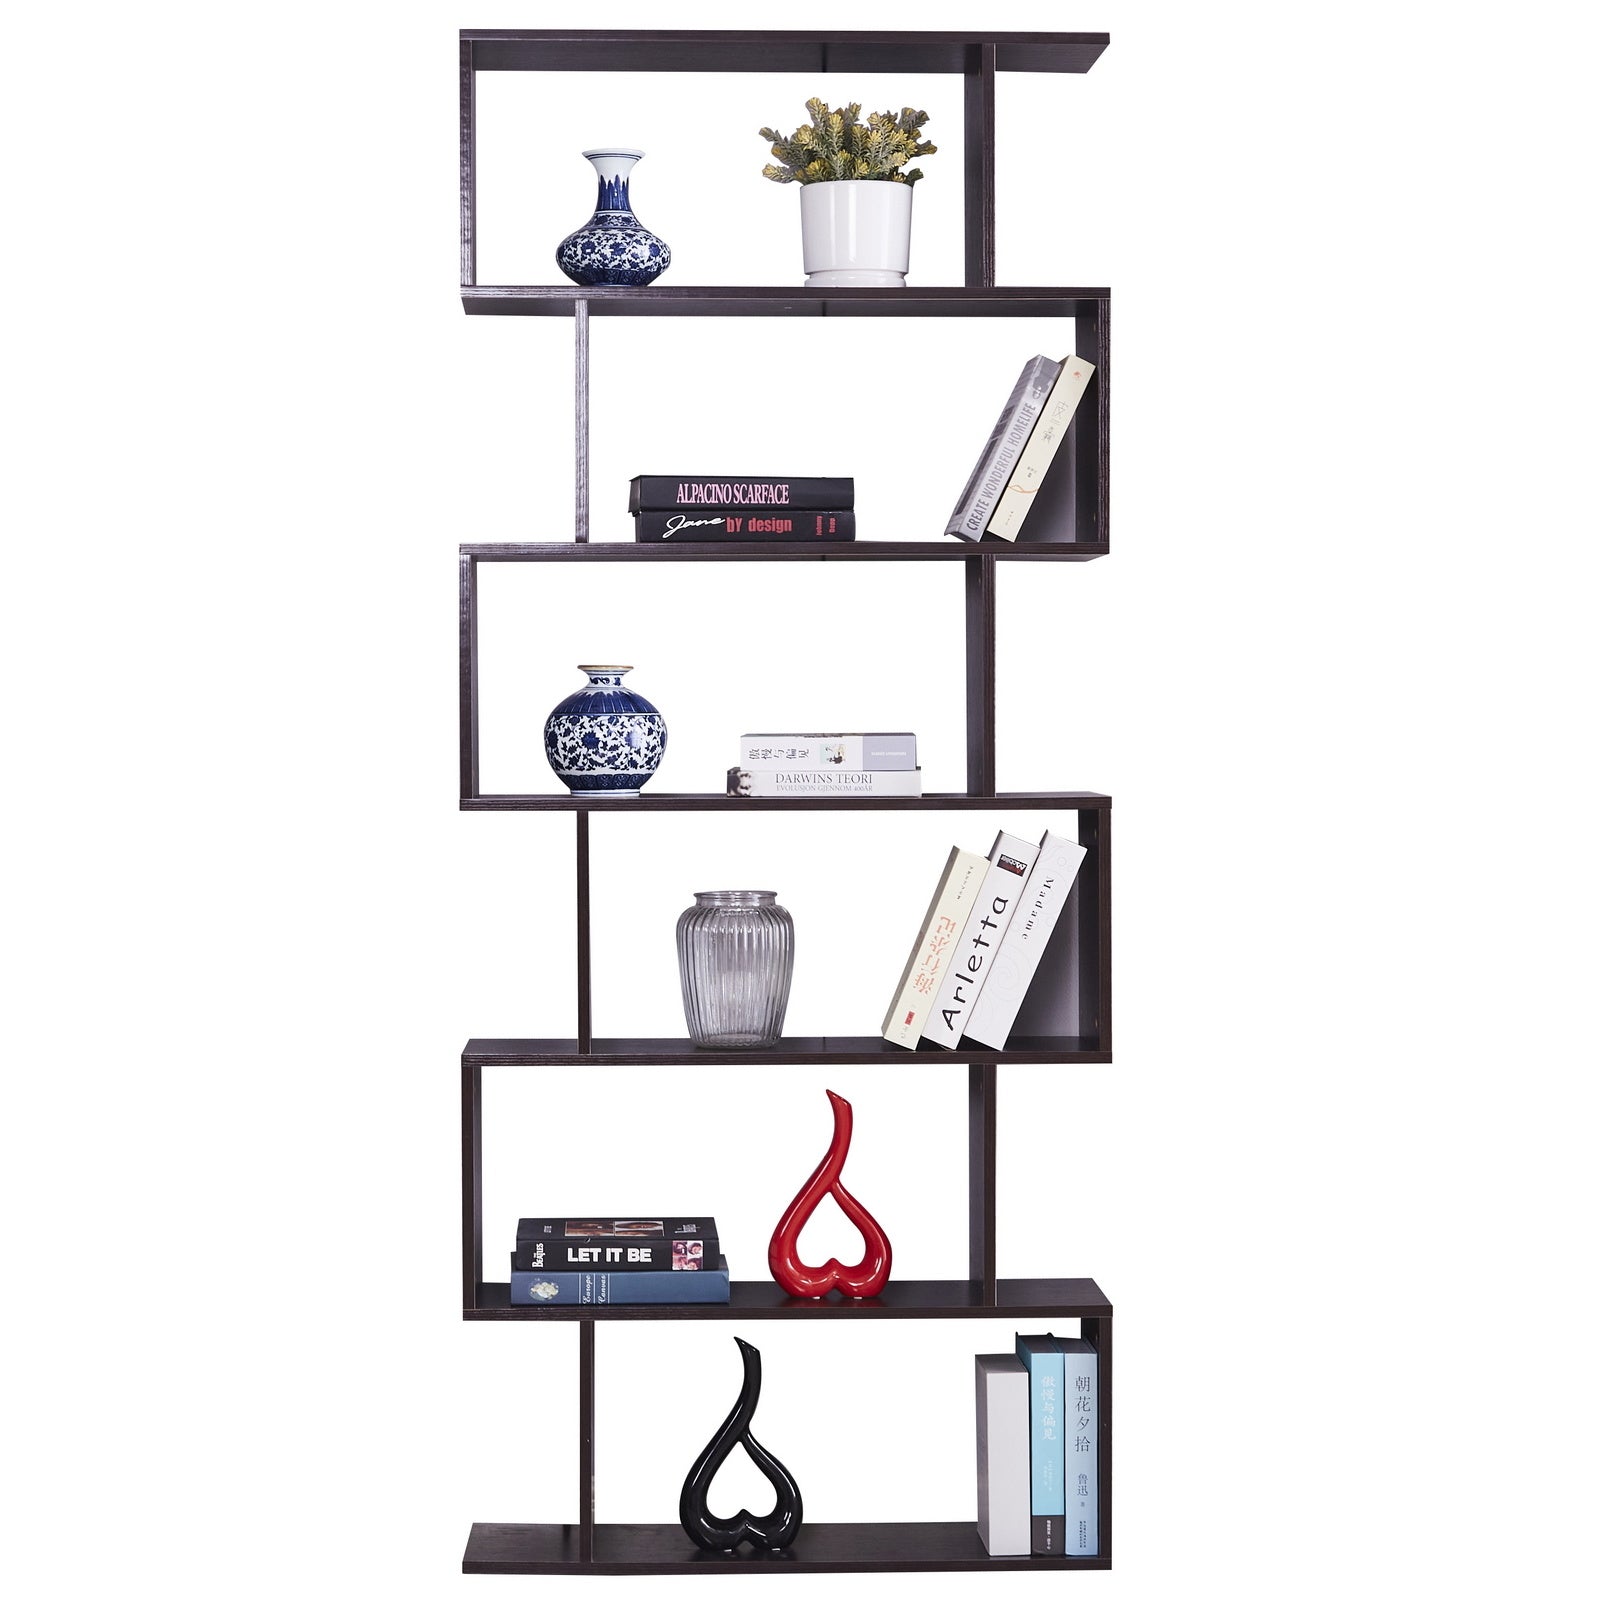 A 6 Shelf Bookcase, Modern S-Shaped Z-Shelf Style Bookshelf filled with books, vases, and decorative items on a white background.